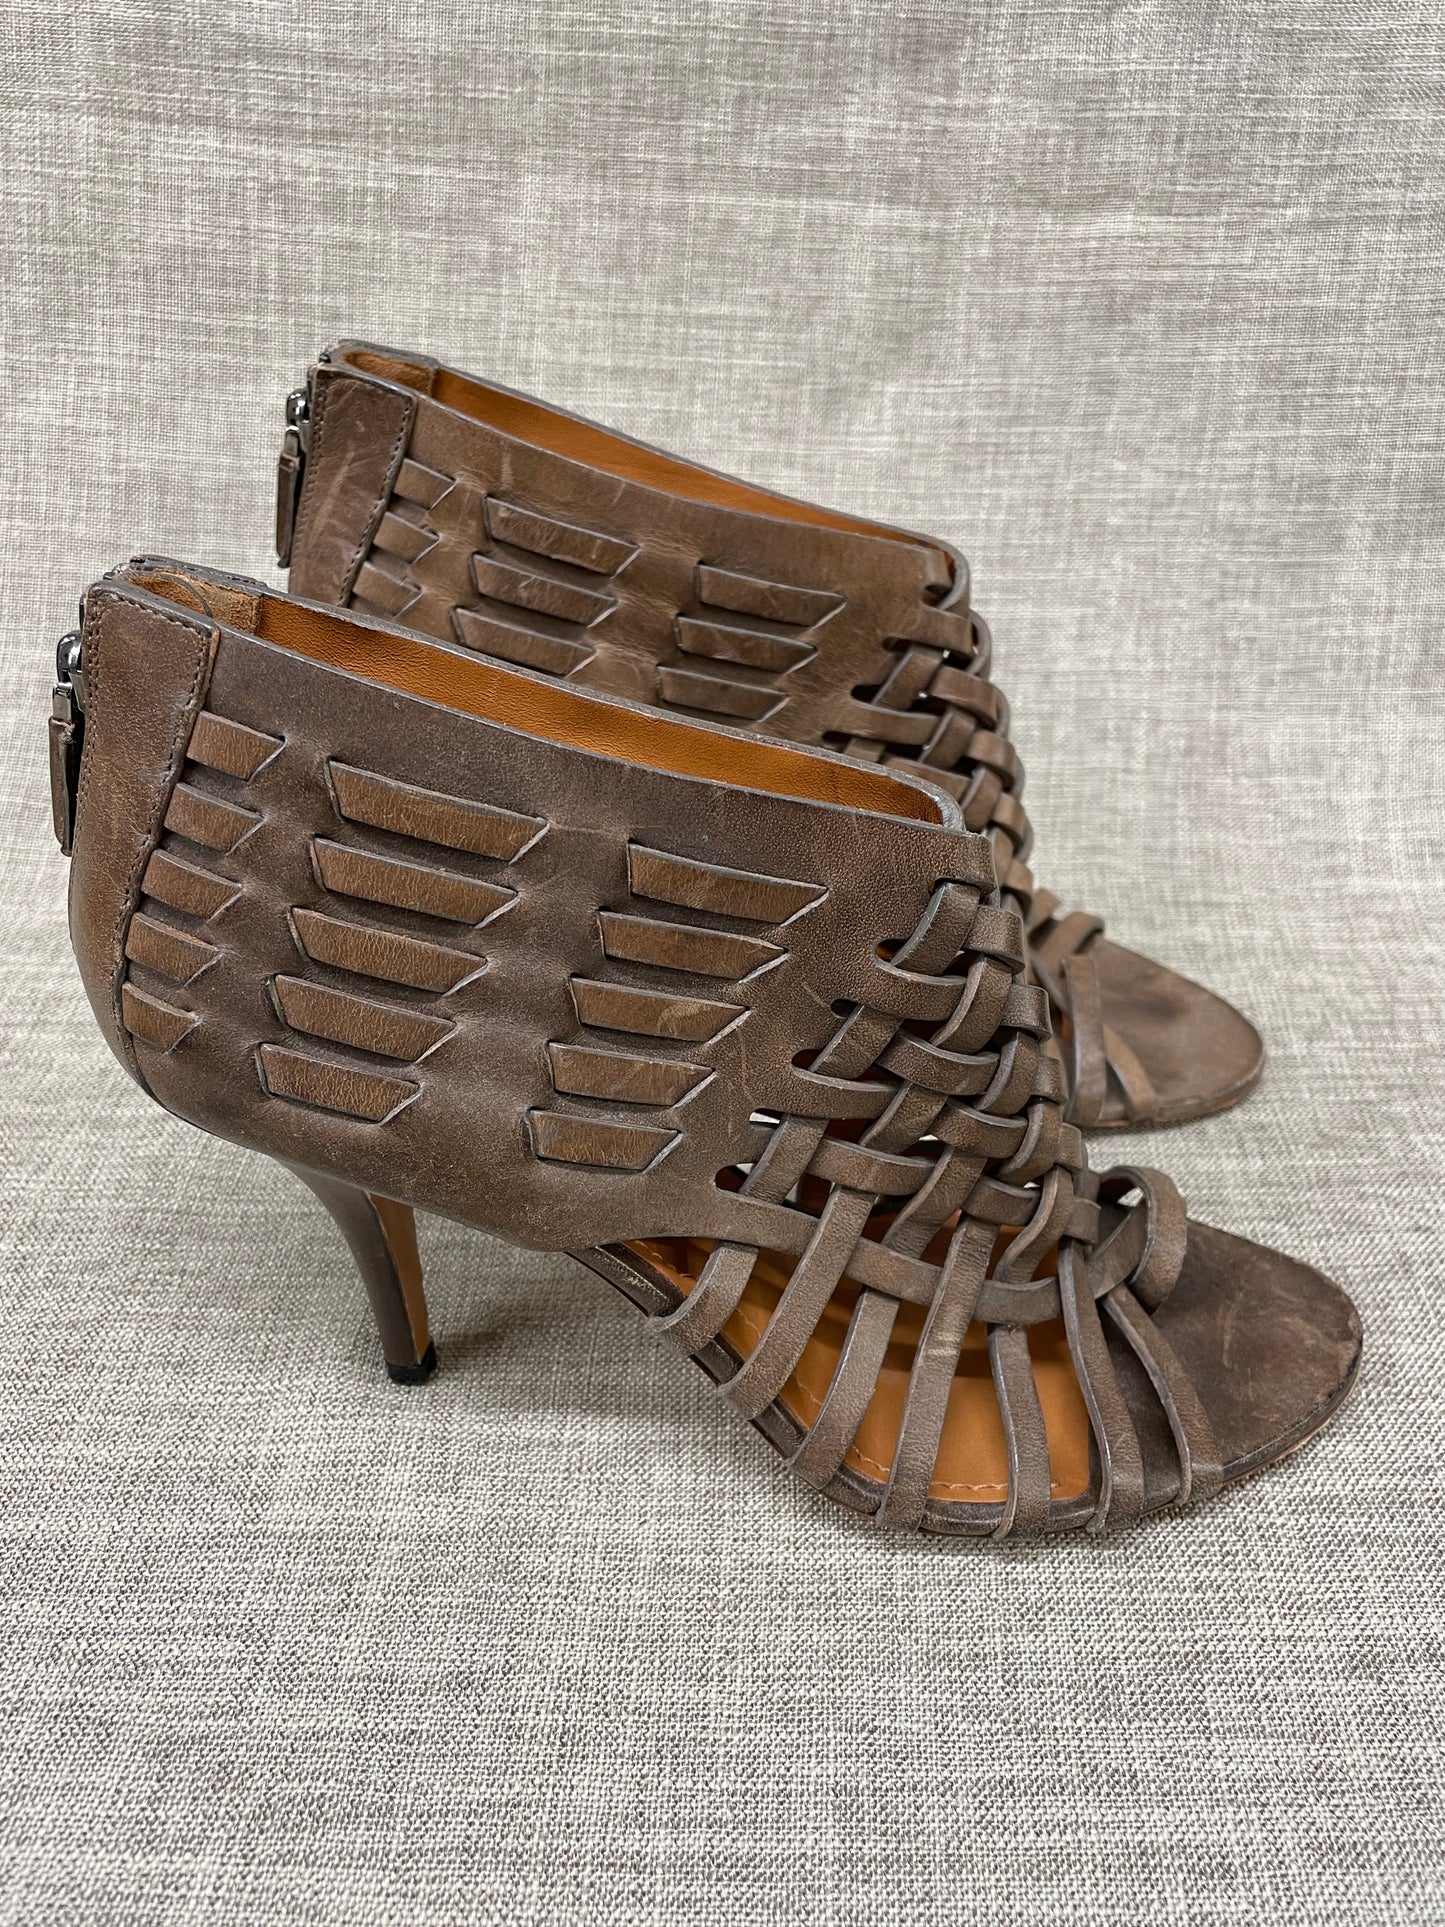 Givenchy Taupe Brown Leather Strappy Heeled Shoes Sandals Size 38 UK 5